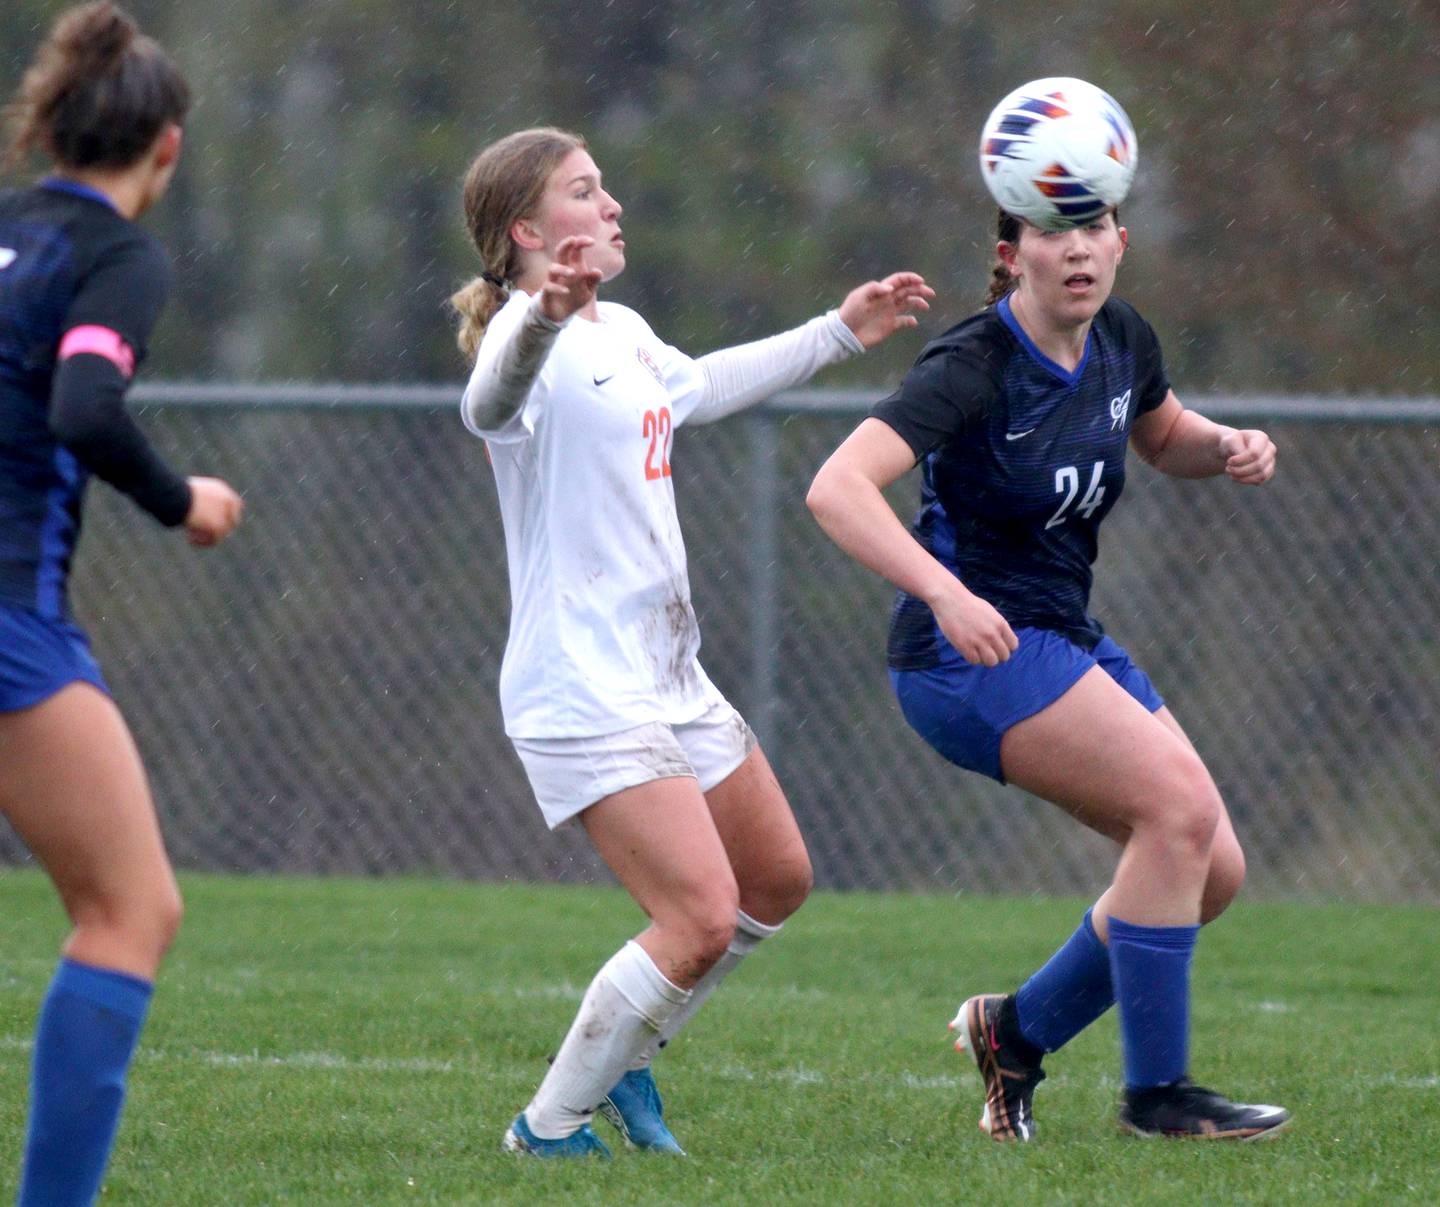 Burlington Central’s Alison Kowall, right, looks for the ball with Crystal Lake Central’s Olivia Anderson, center,  in varsity soccer at Burlington Thursday night.